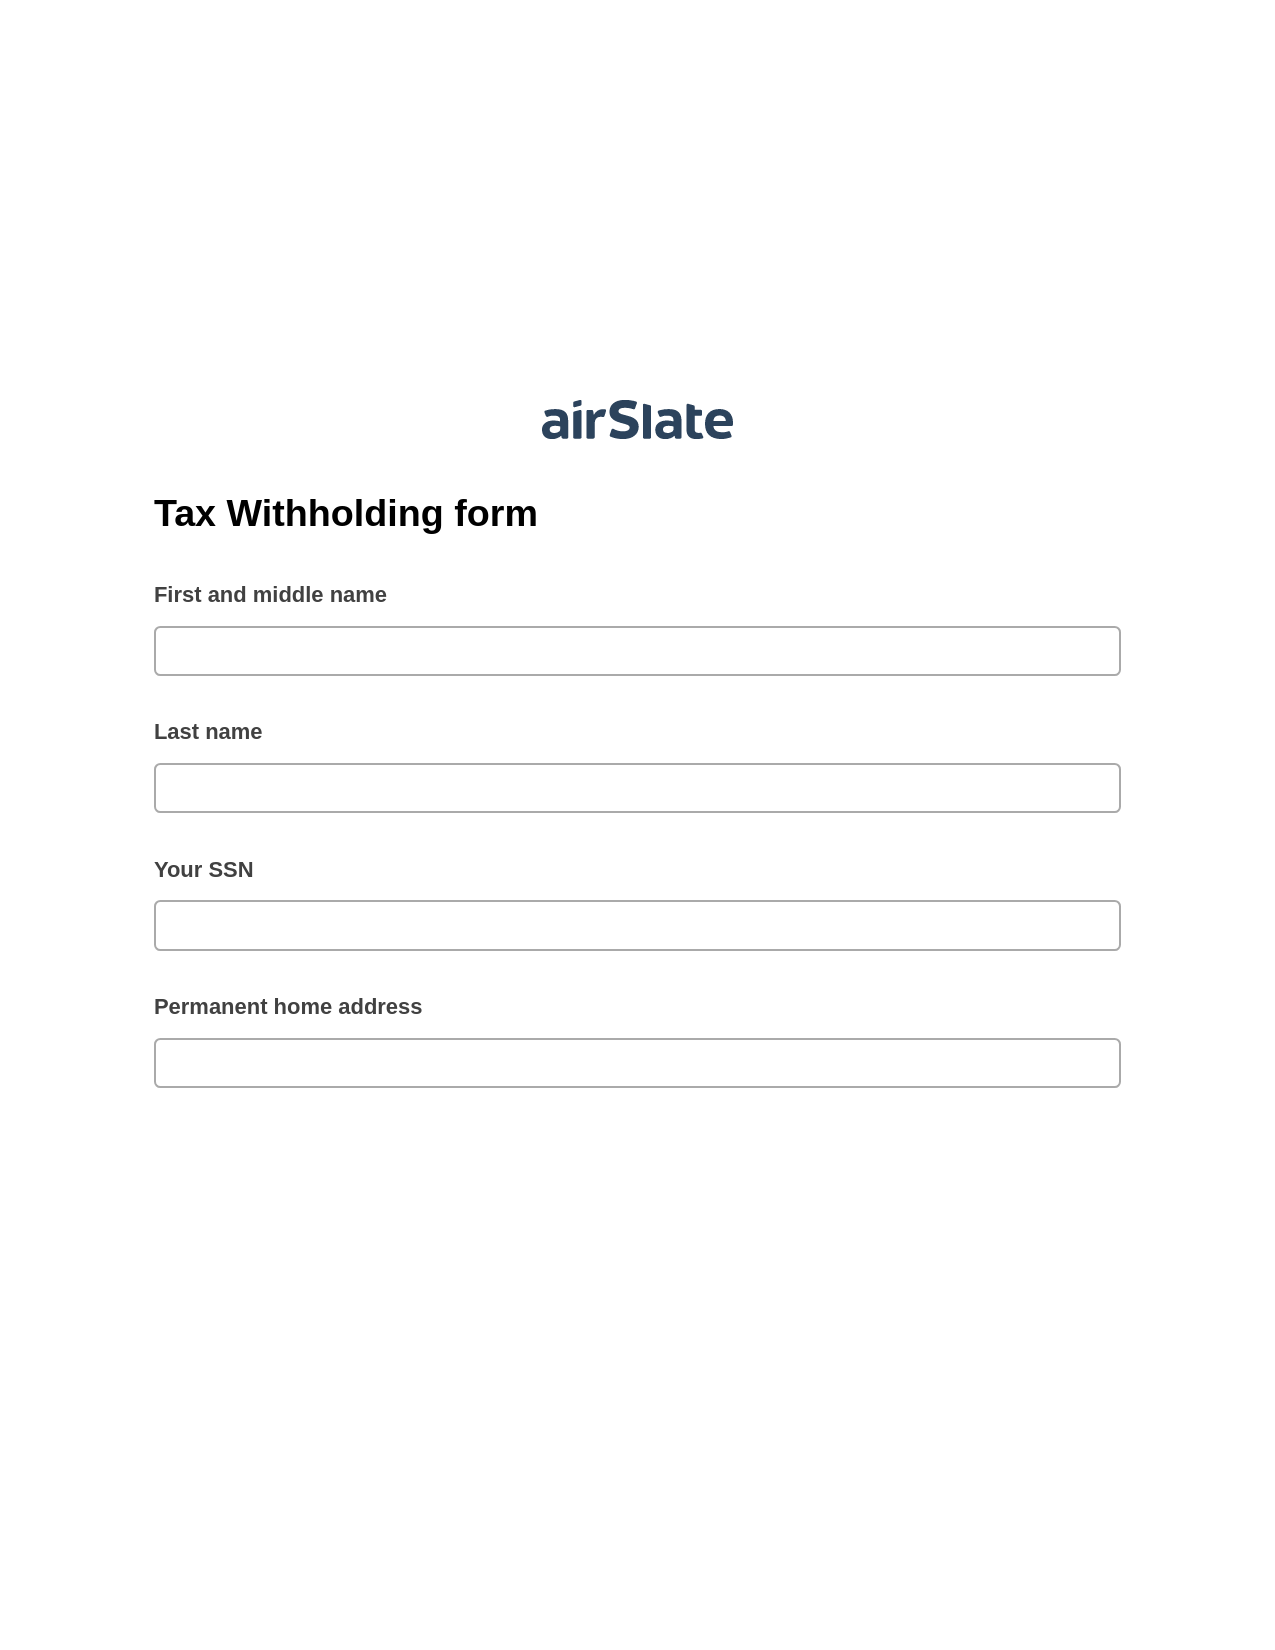 Multirole Tax Withholding form Pre-fill from Google Sheets Bot, SendGrid Send Campaign Bot, Box Bot